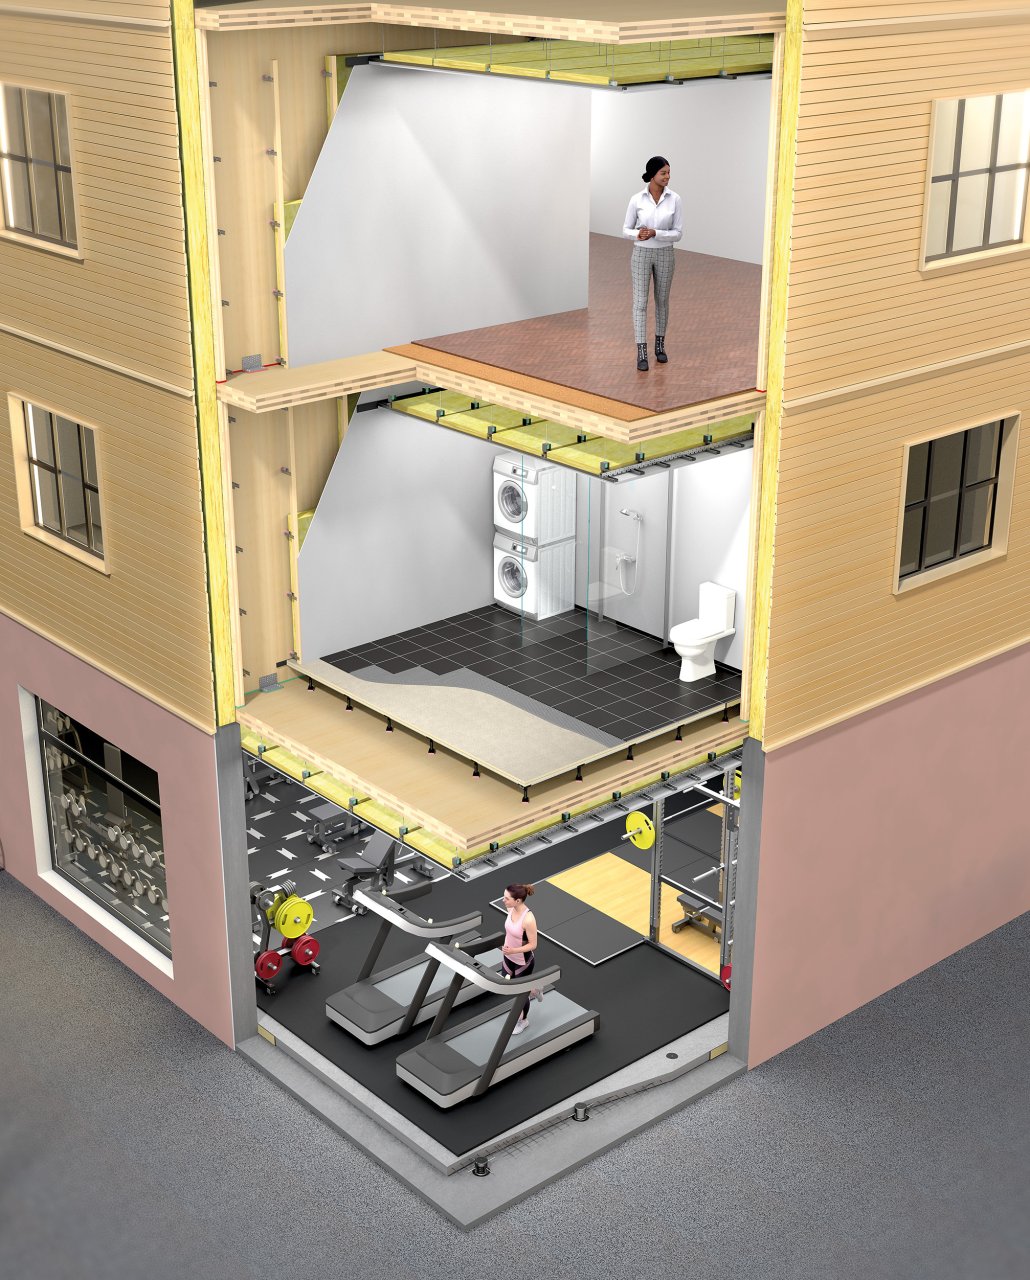 An illustration of a multi-story building with products from Vibratec to reduce vibrations and noise